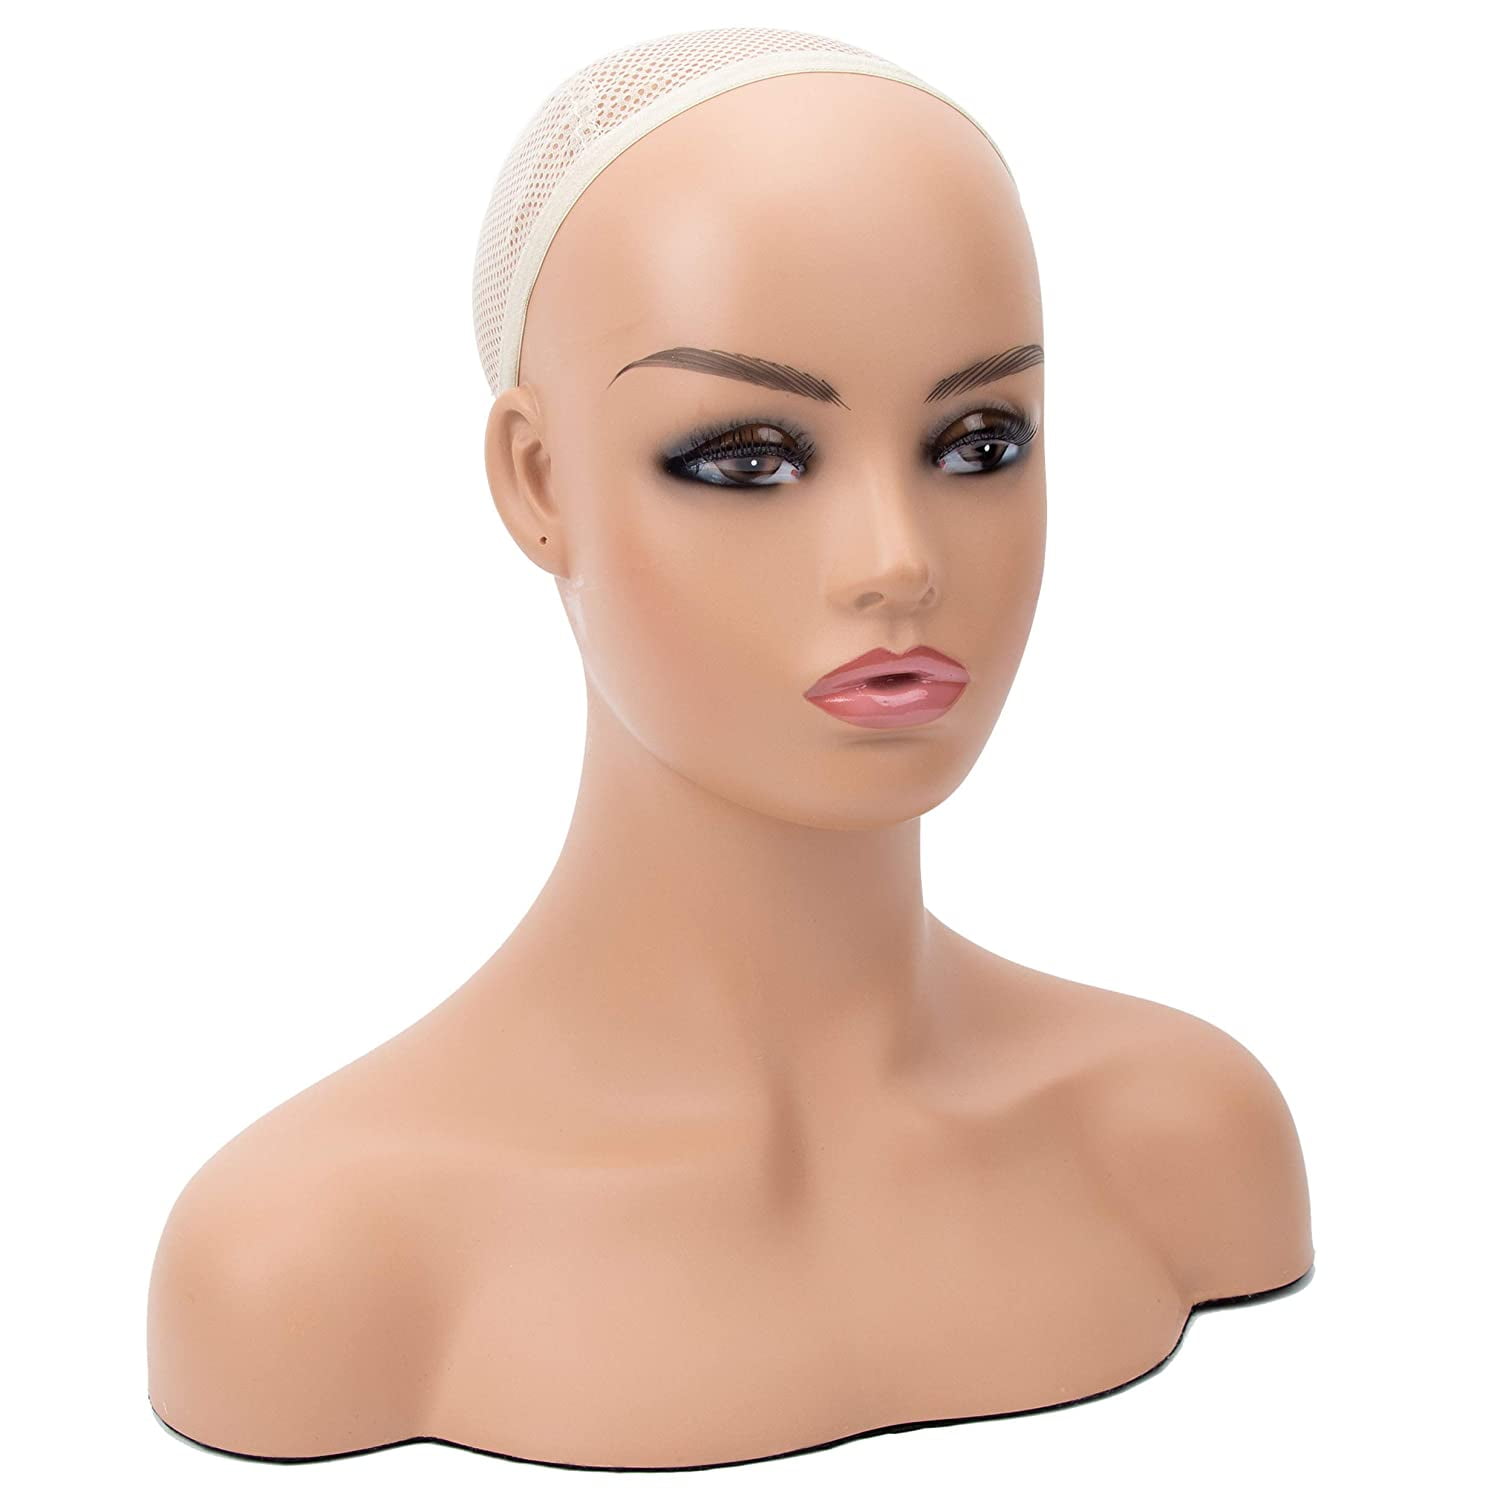 A1 Pacific Mannequin PVC Manikin Head Realistic Mannequin Head Bust Wig Head Stand for Wigs Display Making Styling PMH-DC487 (16.5 Inches, Caucasian)